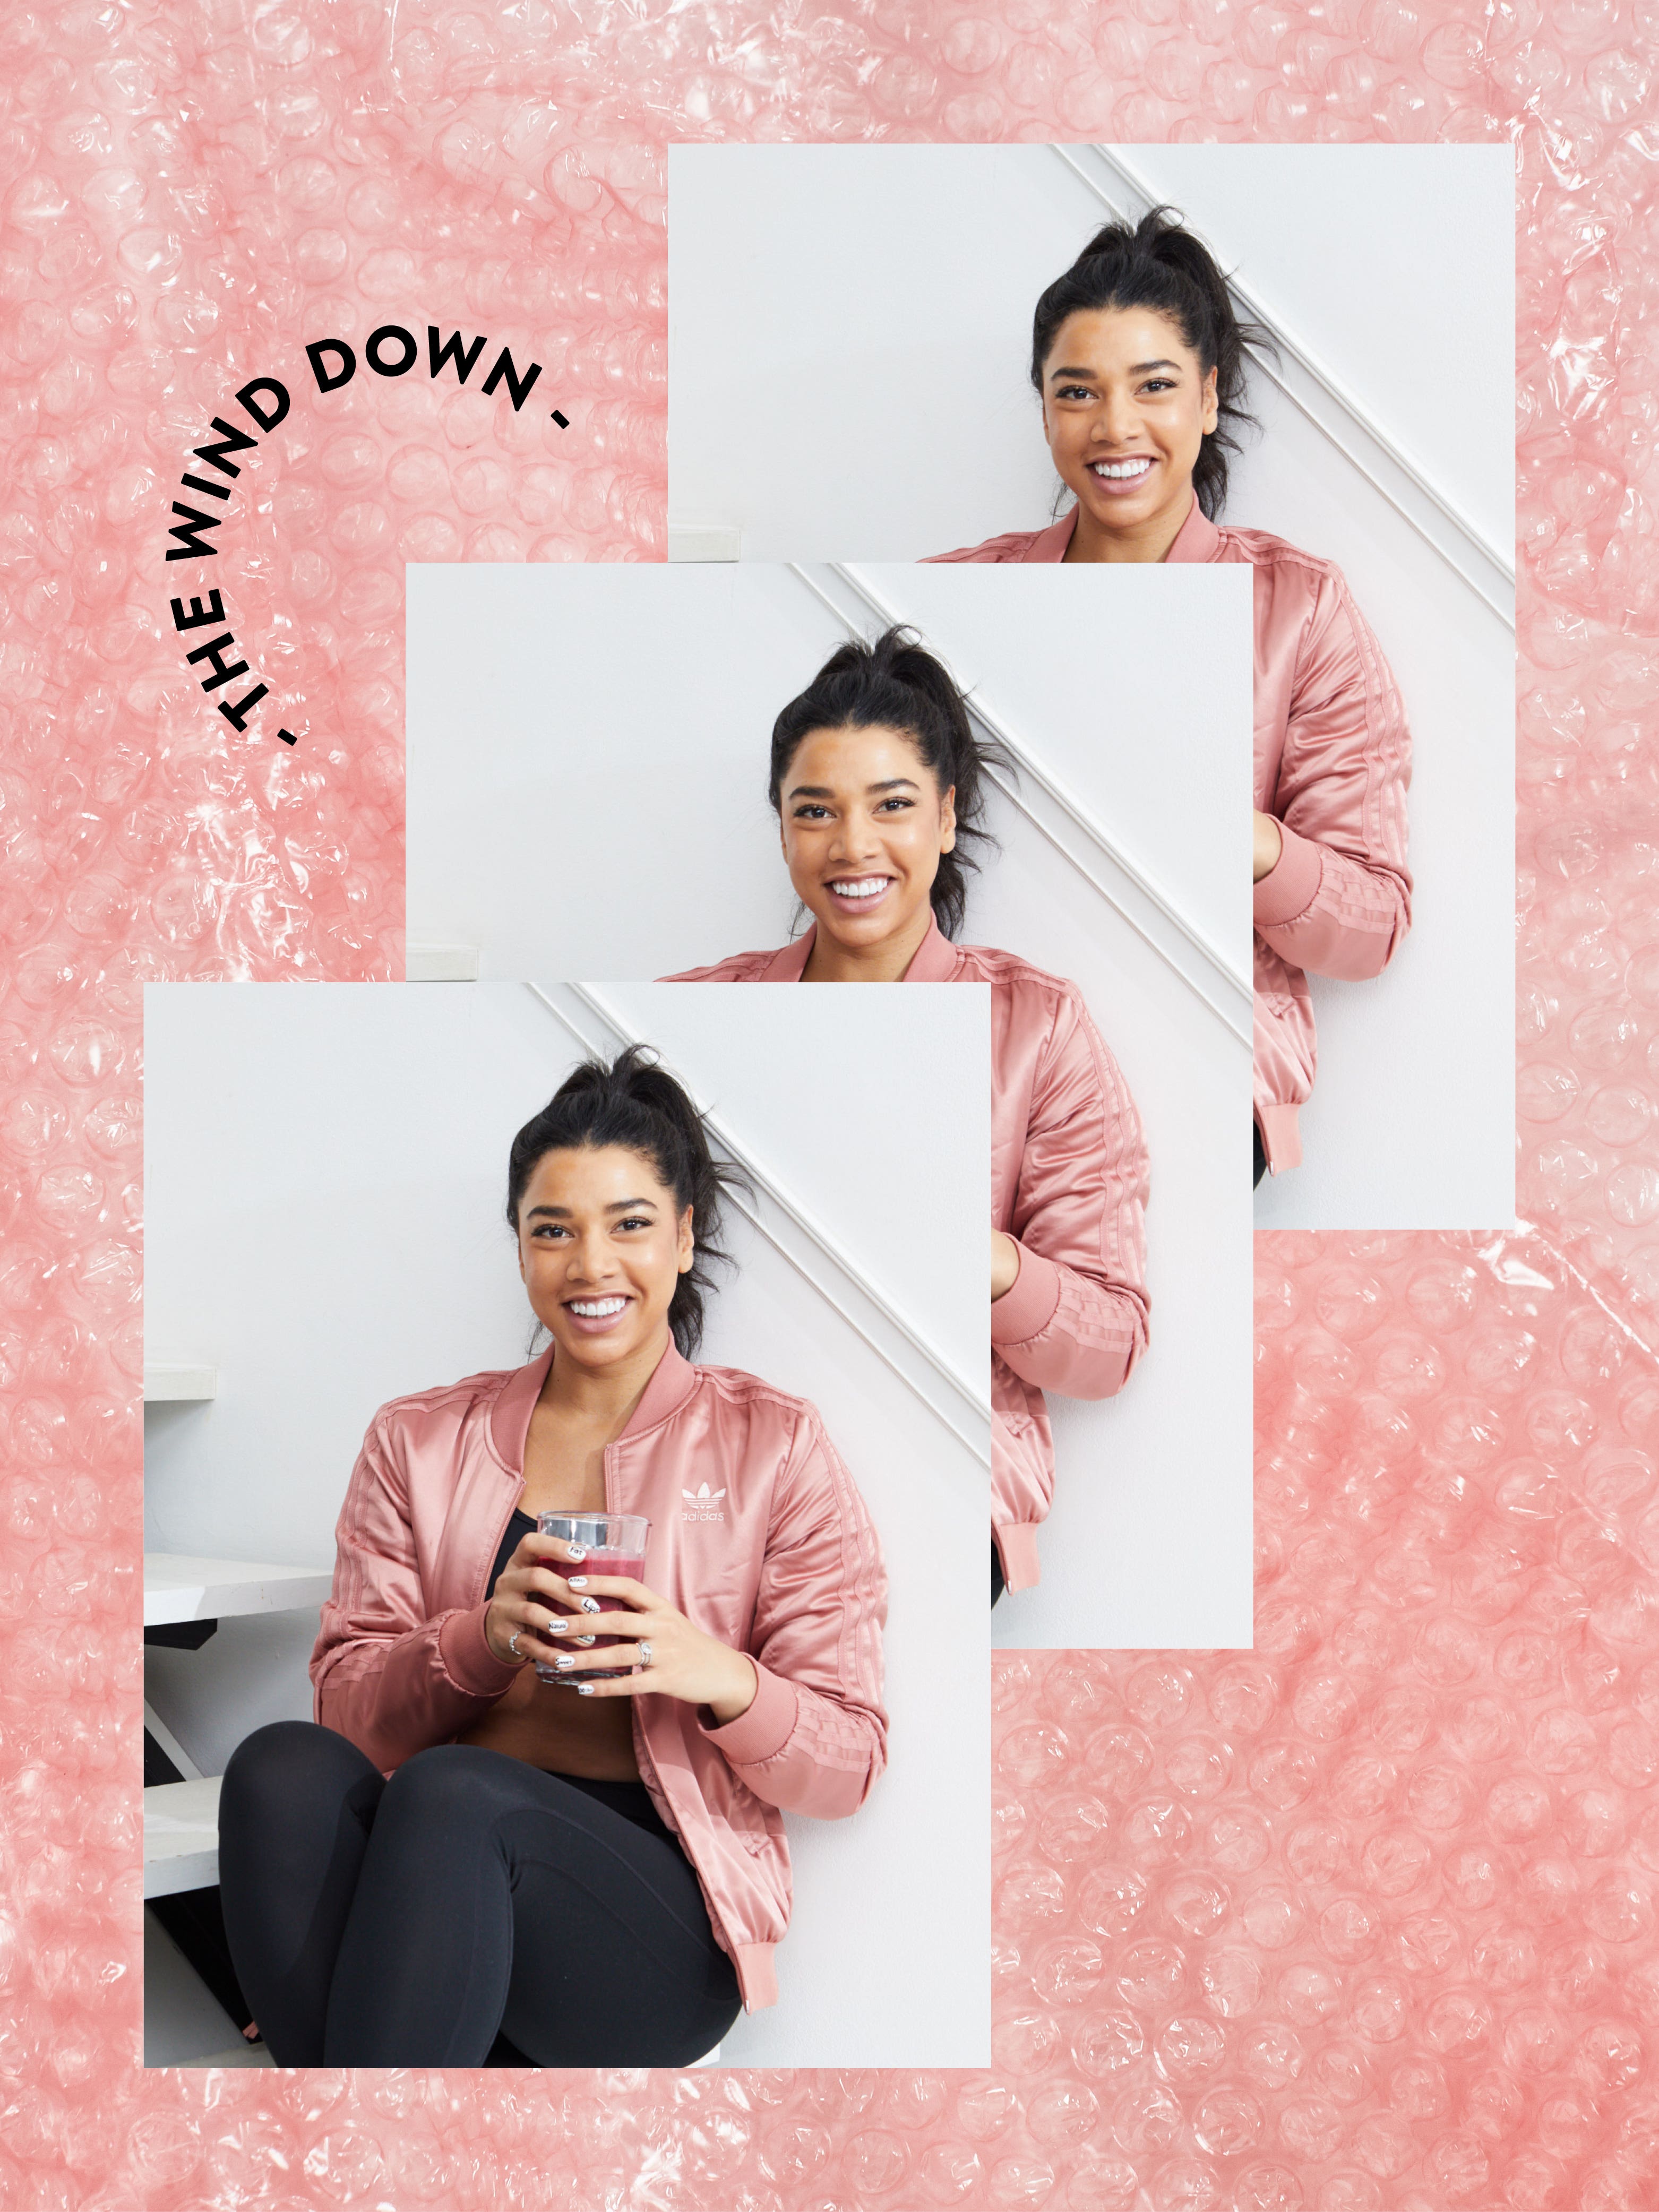 Hannah Bronfman’s Nighttime Routine Involves Chilling Out to a Good Netflix Thriller